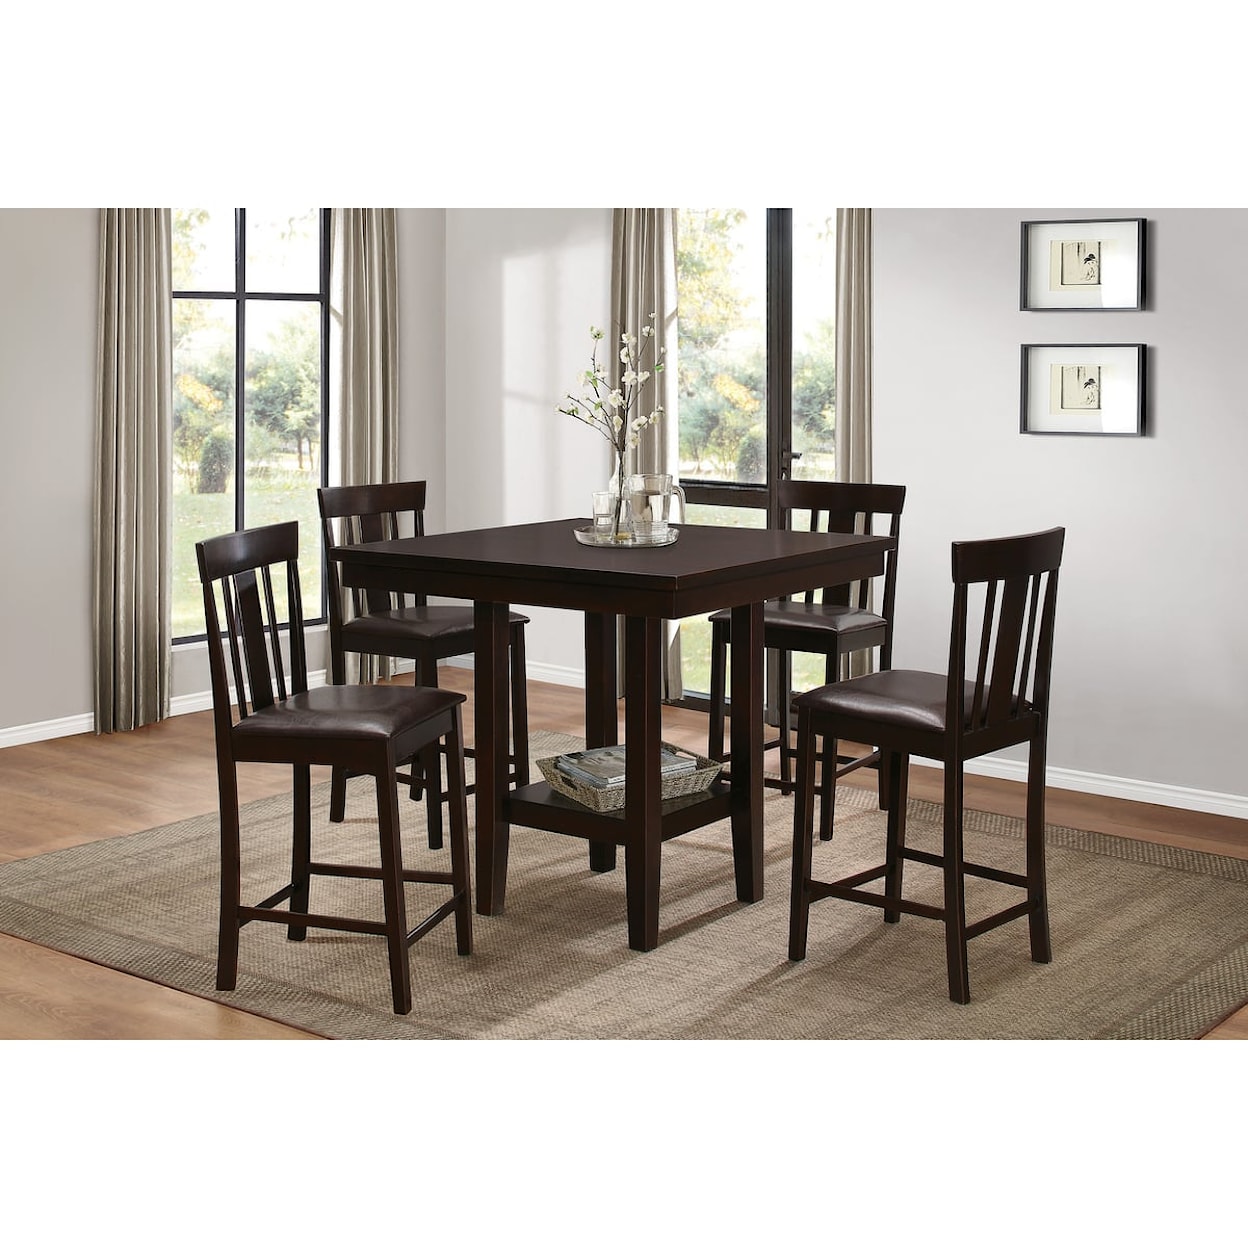 Homelegance Diego Counter Height Dining Table